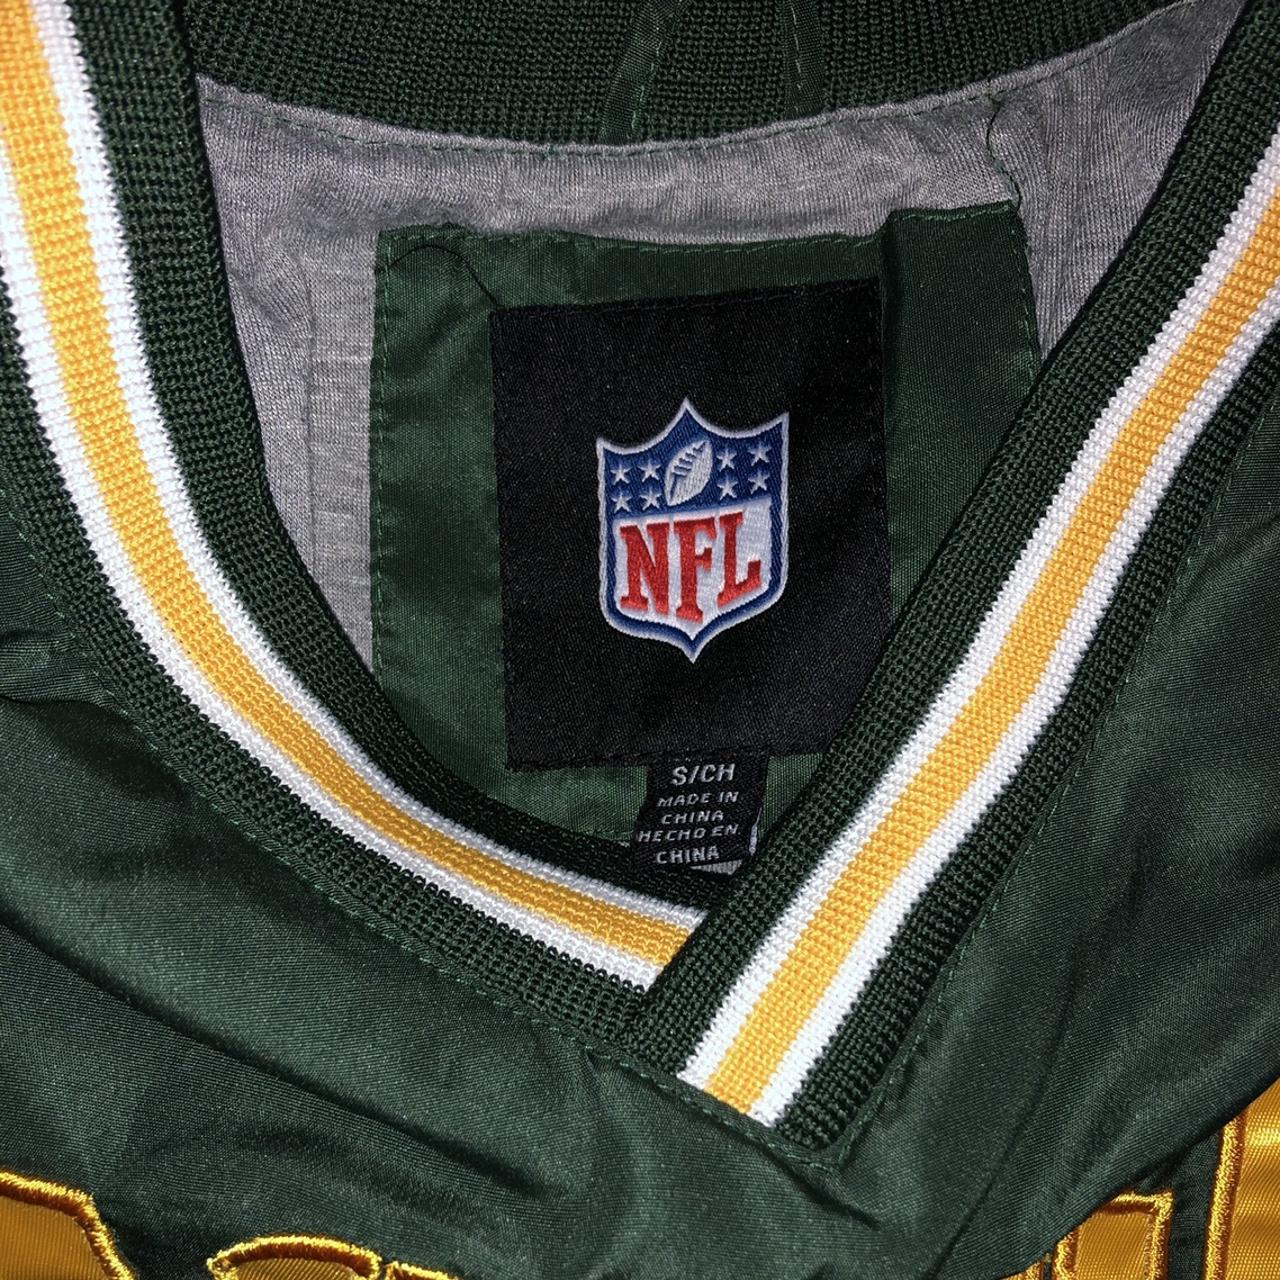 Product Image 4 - Vintage Packets Windbreaker

Authentic NFL

Size: Small
Condition: